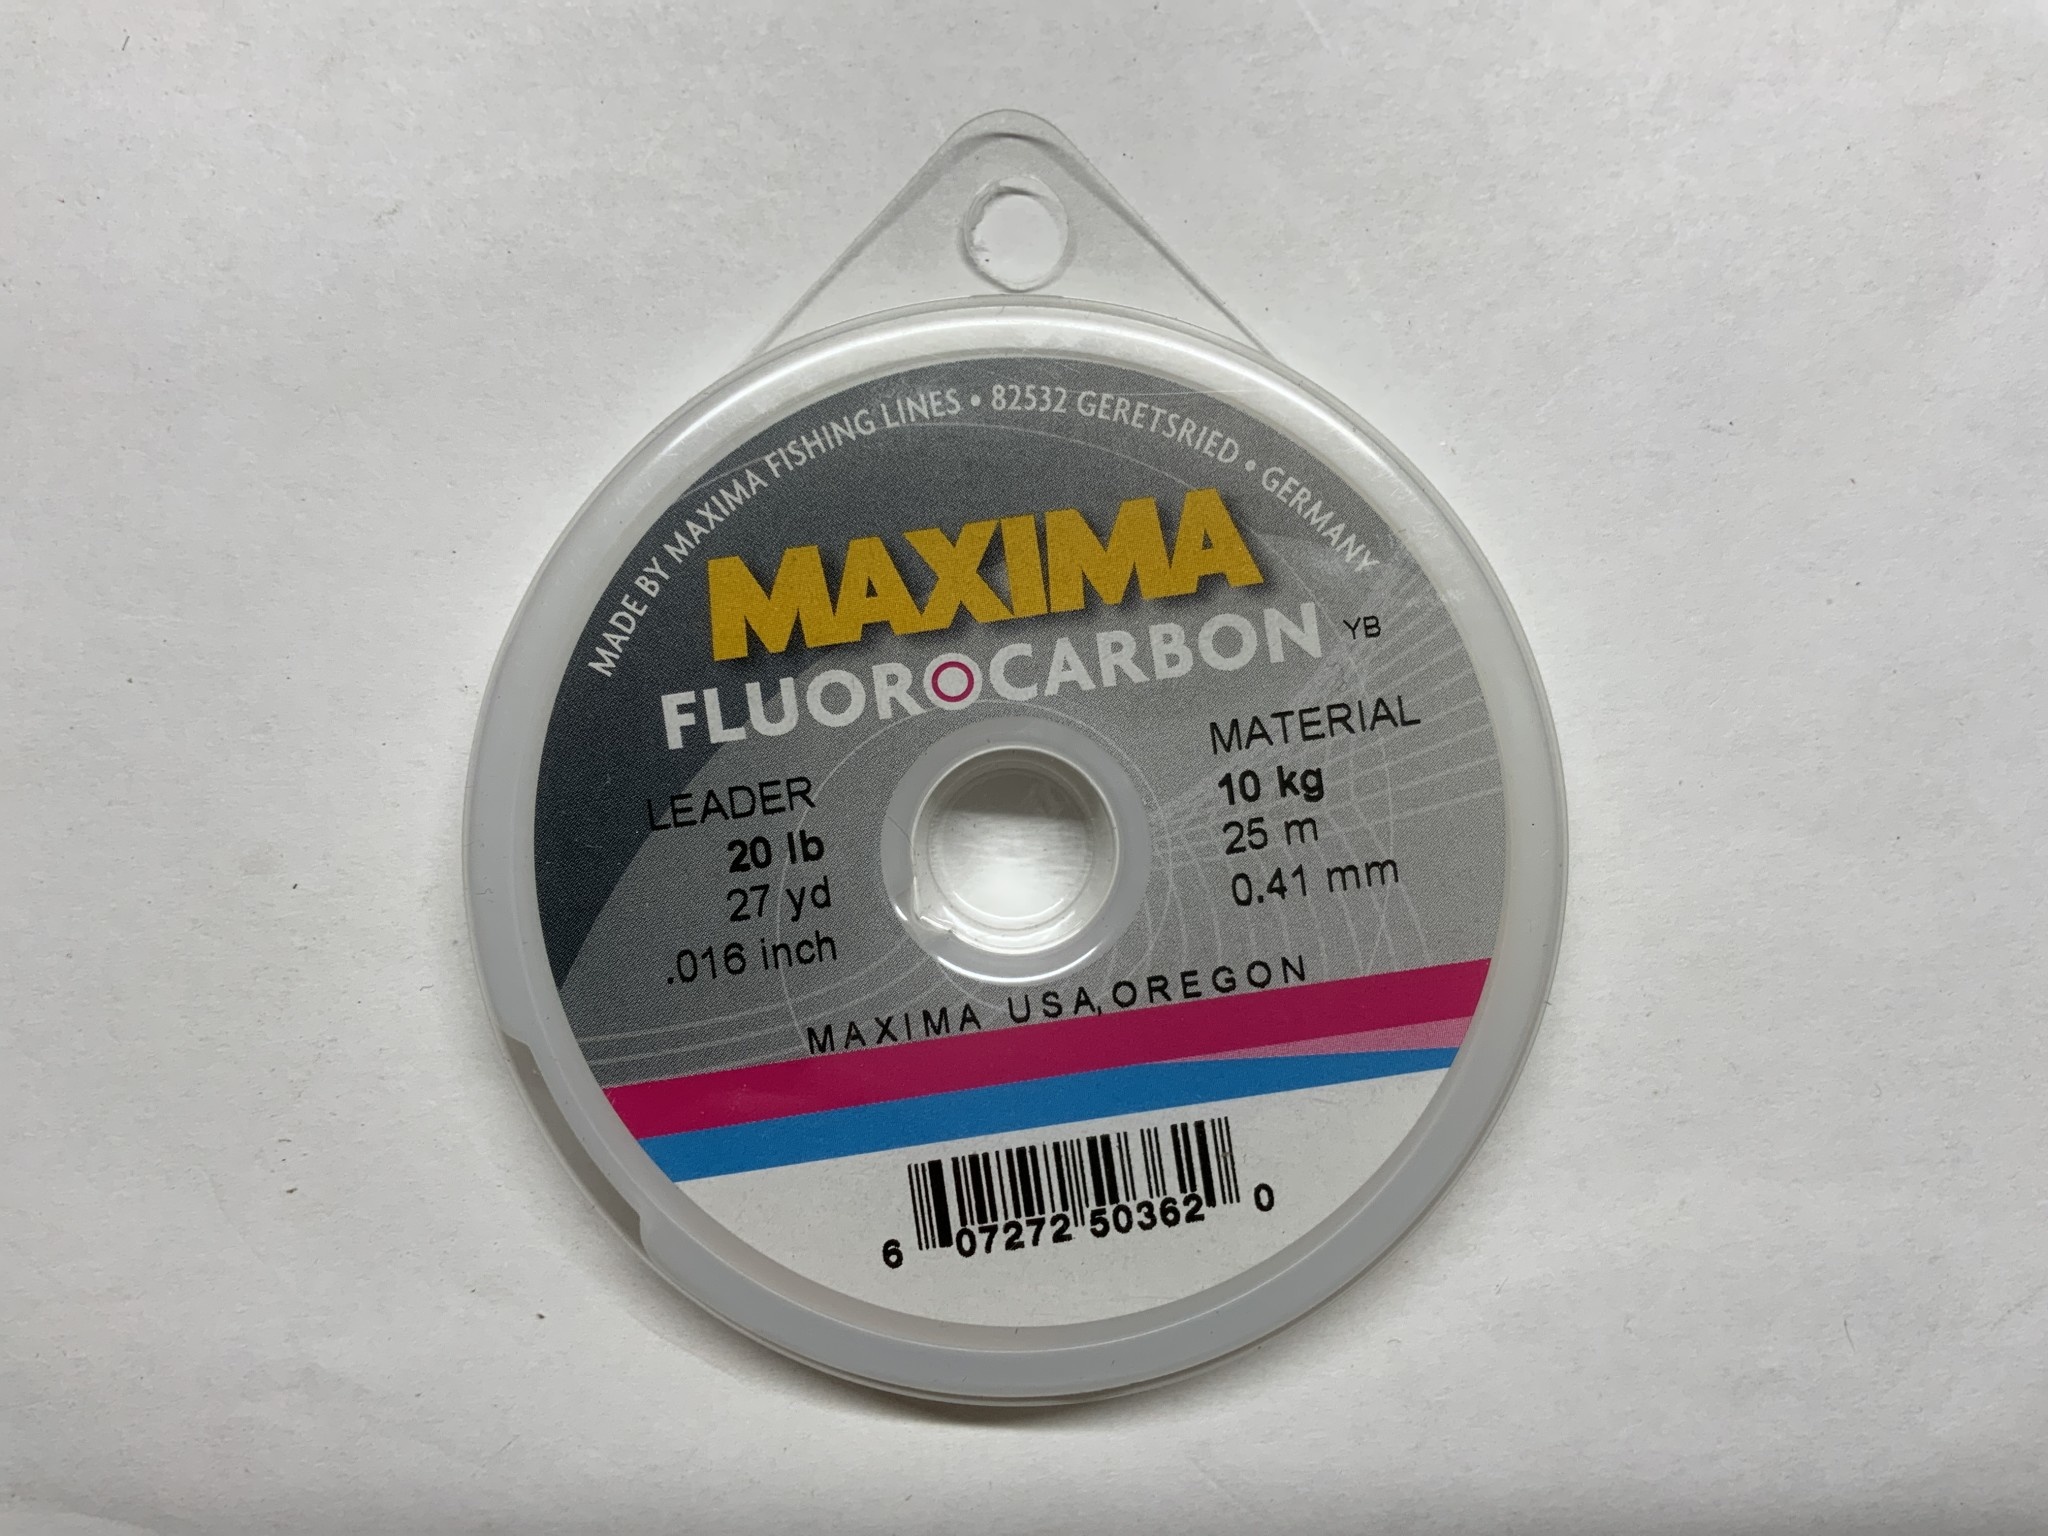 Maxima Fluorocarbon Leader Material 27 YD - All Seasons Sports